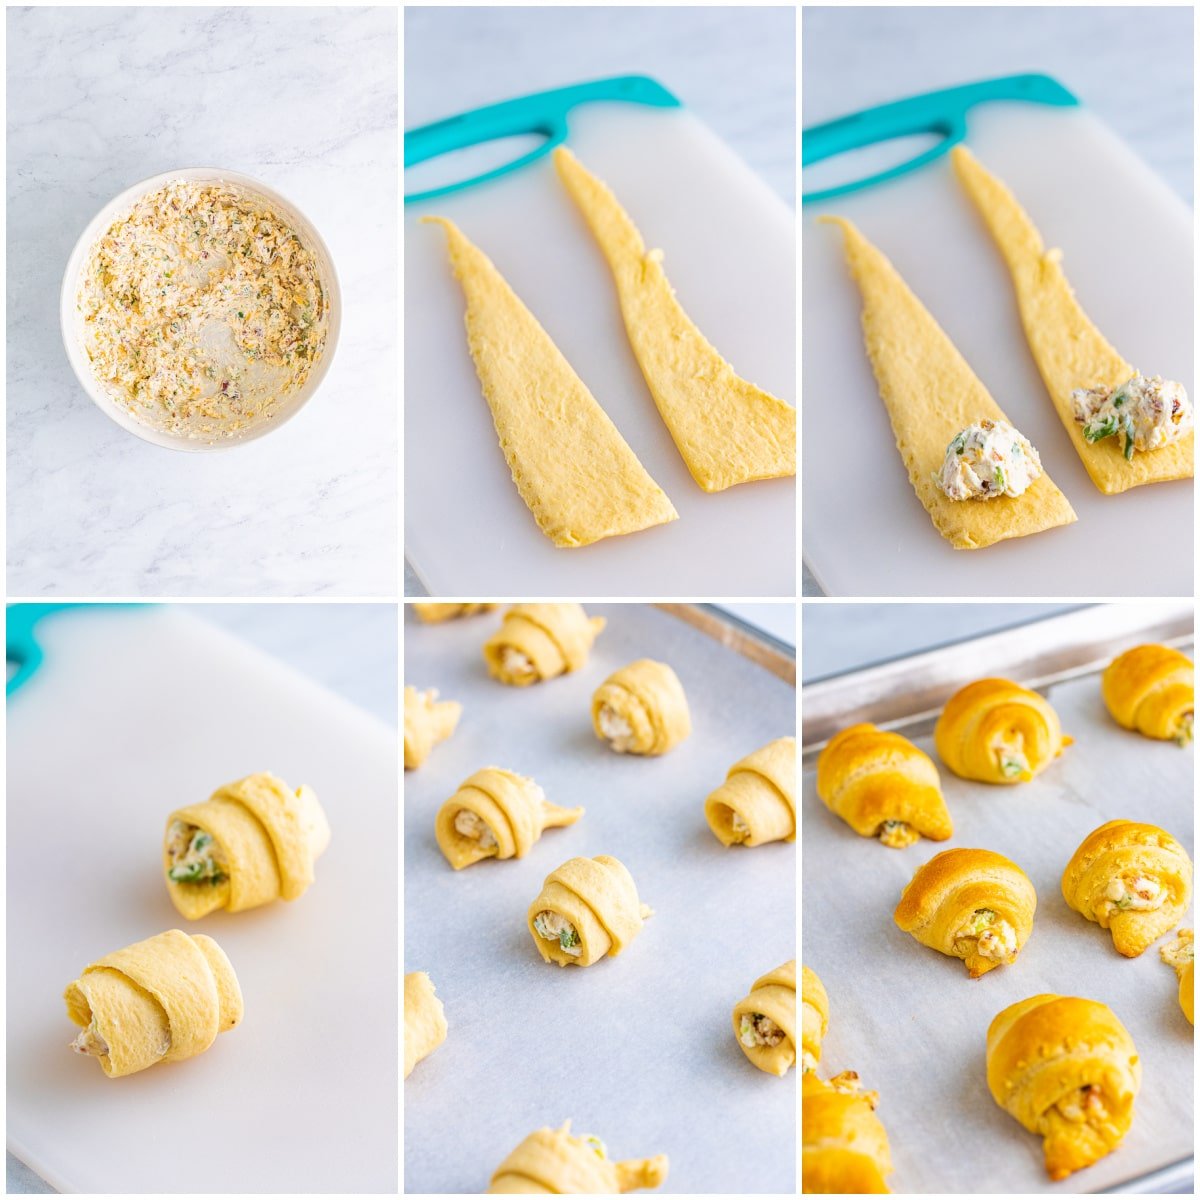 Step by step photos on how to make Jalapeño Popper Crescent Rolls.